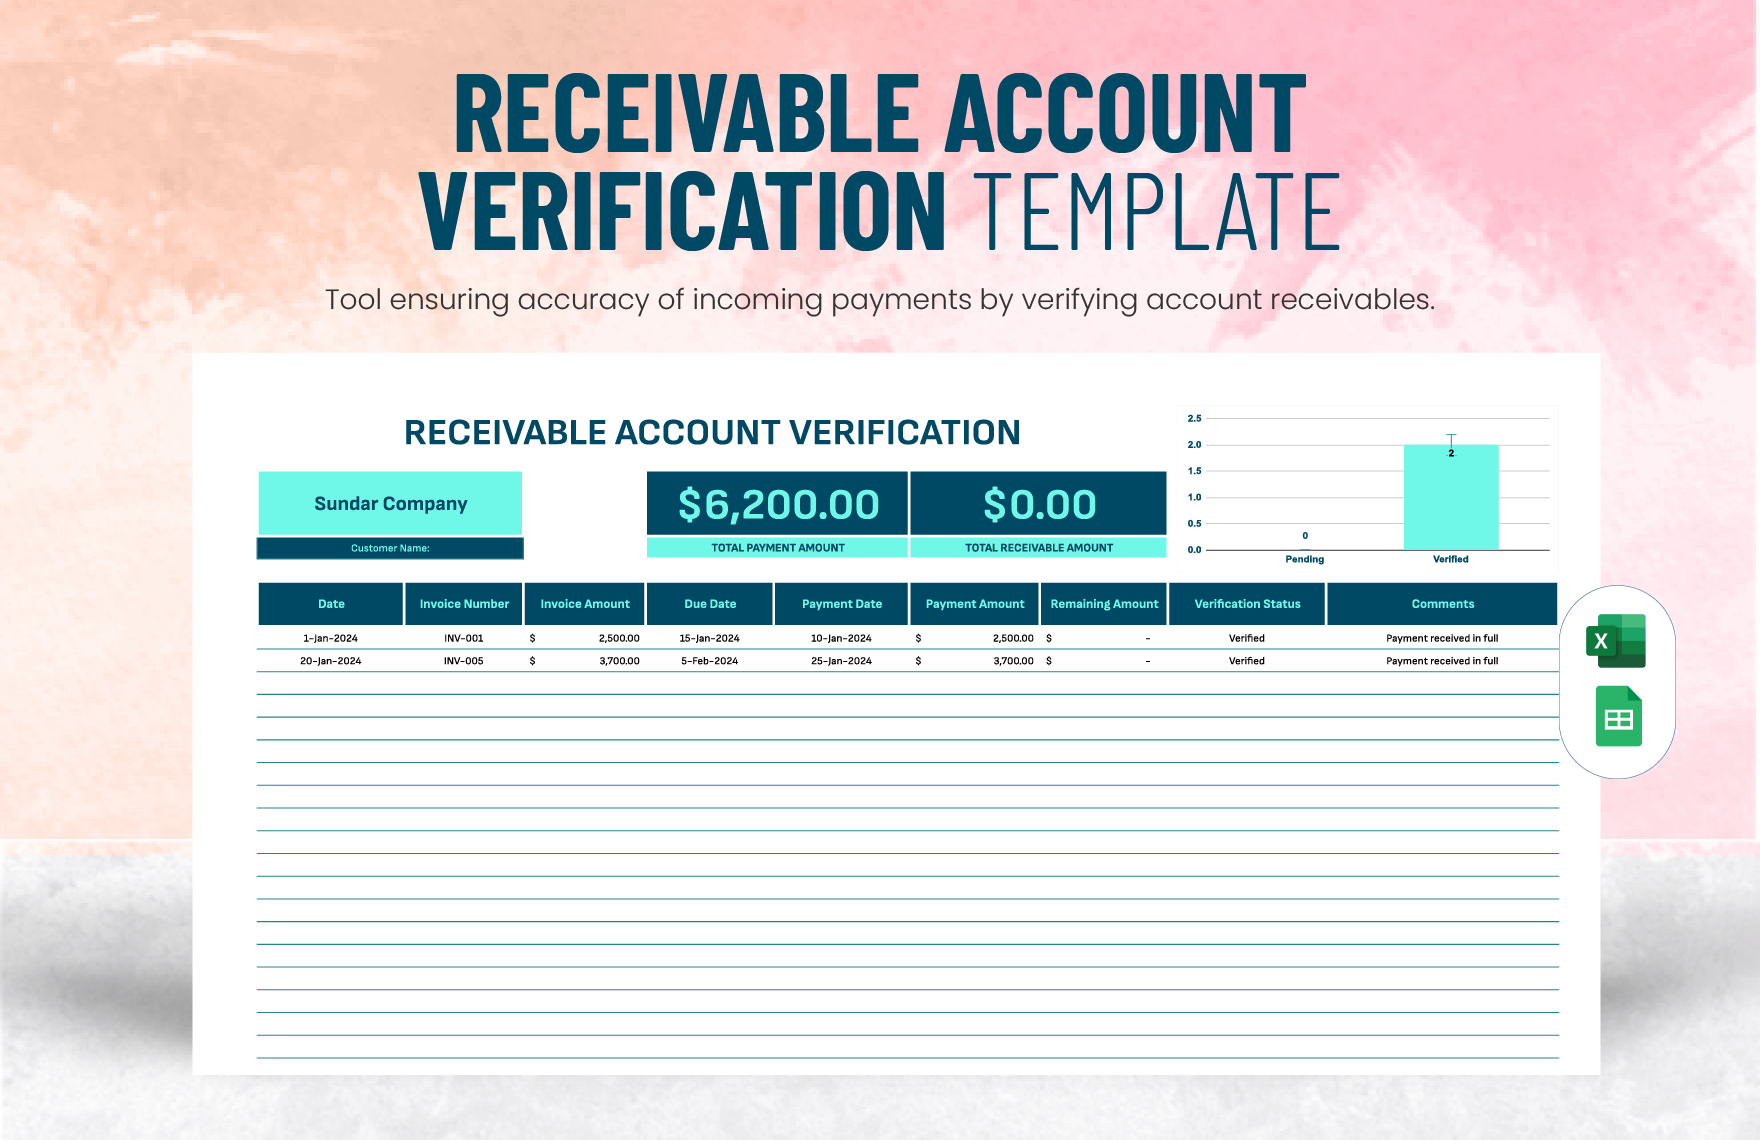 Receivable Account Verification Template in Excel, Google Sheets